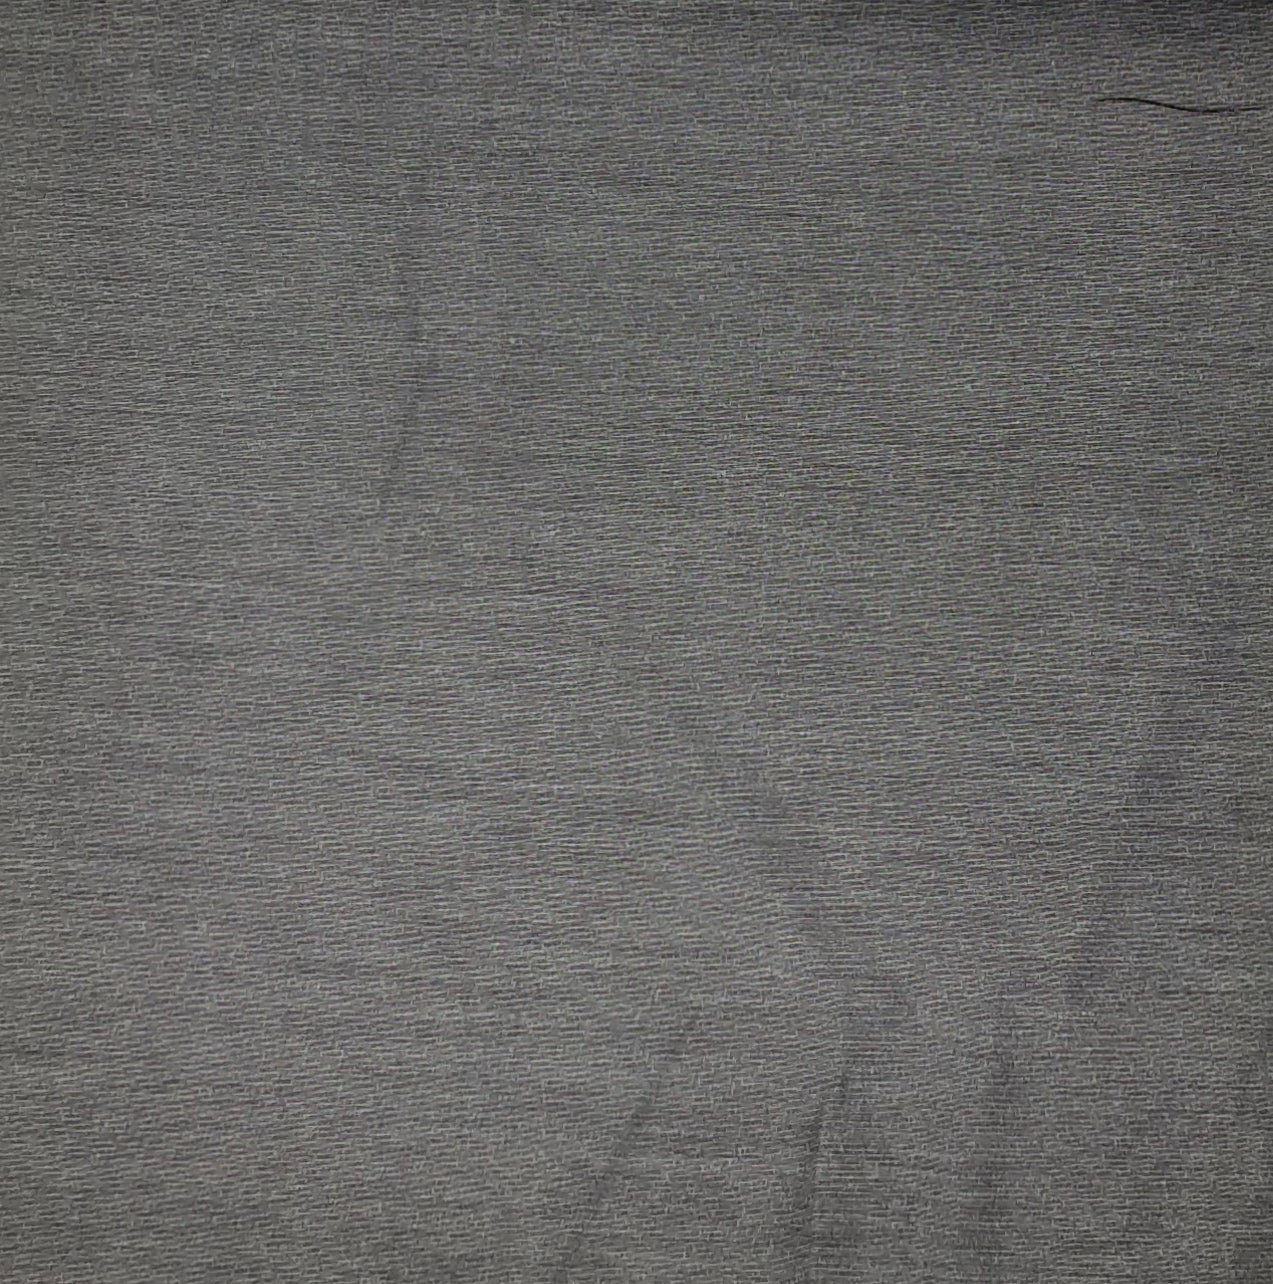 SWEET GRAY CHAM-329 CHAMBRAY EMBROIDERY 51/52"